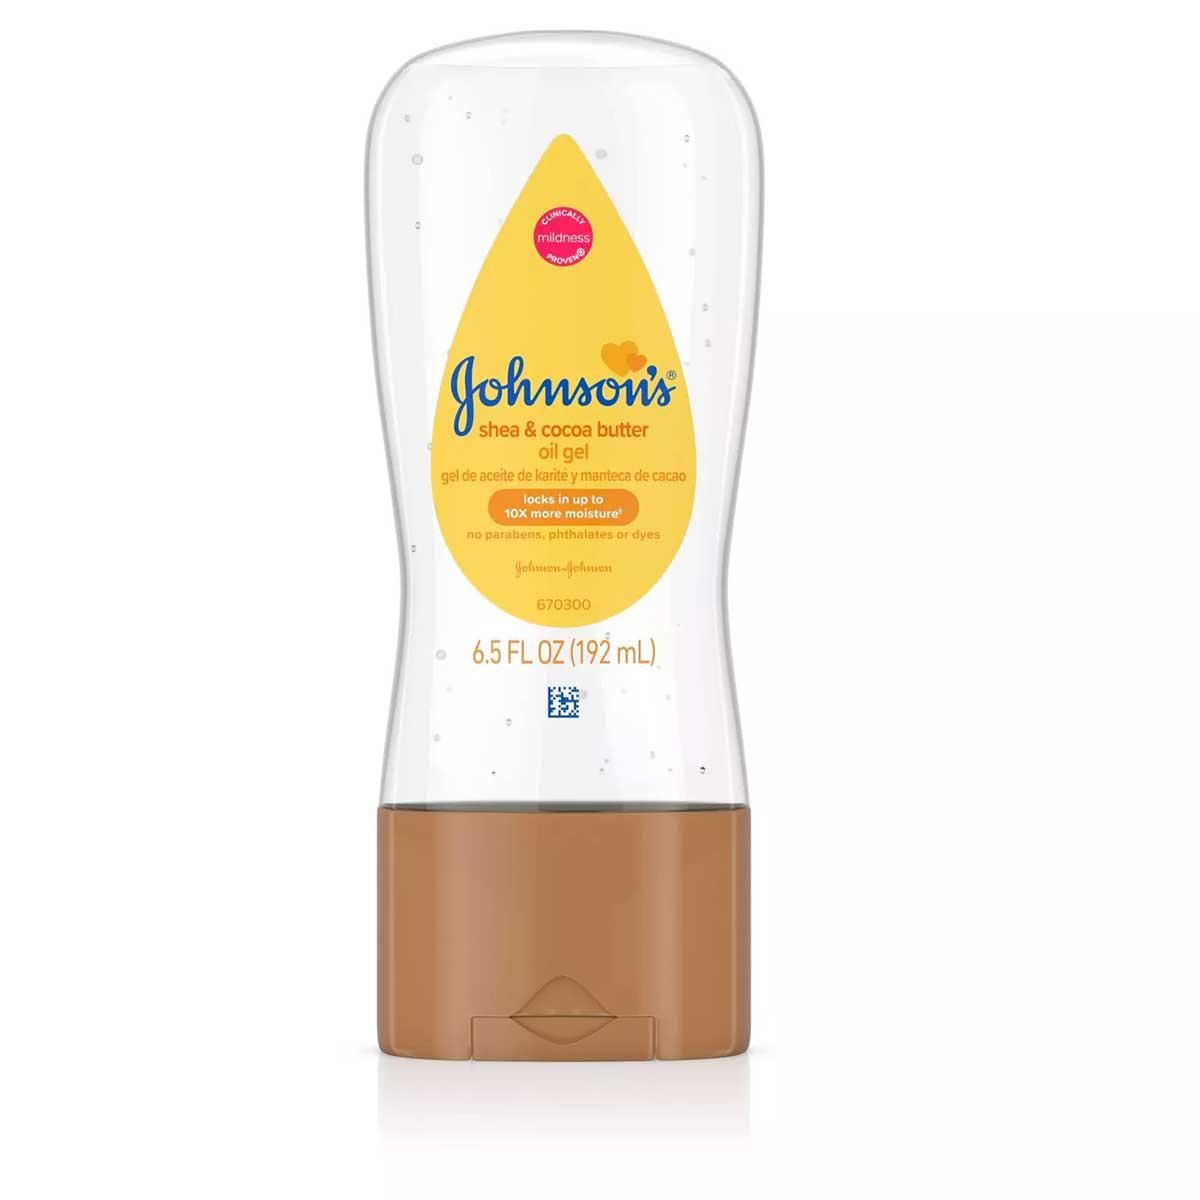 johnsons baby oil gel with shea and cocoa butter